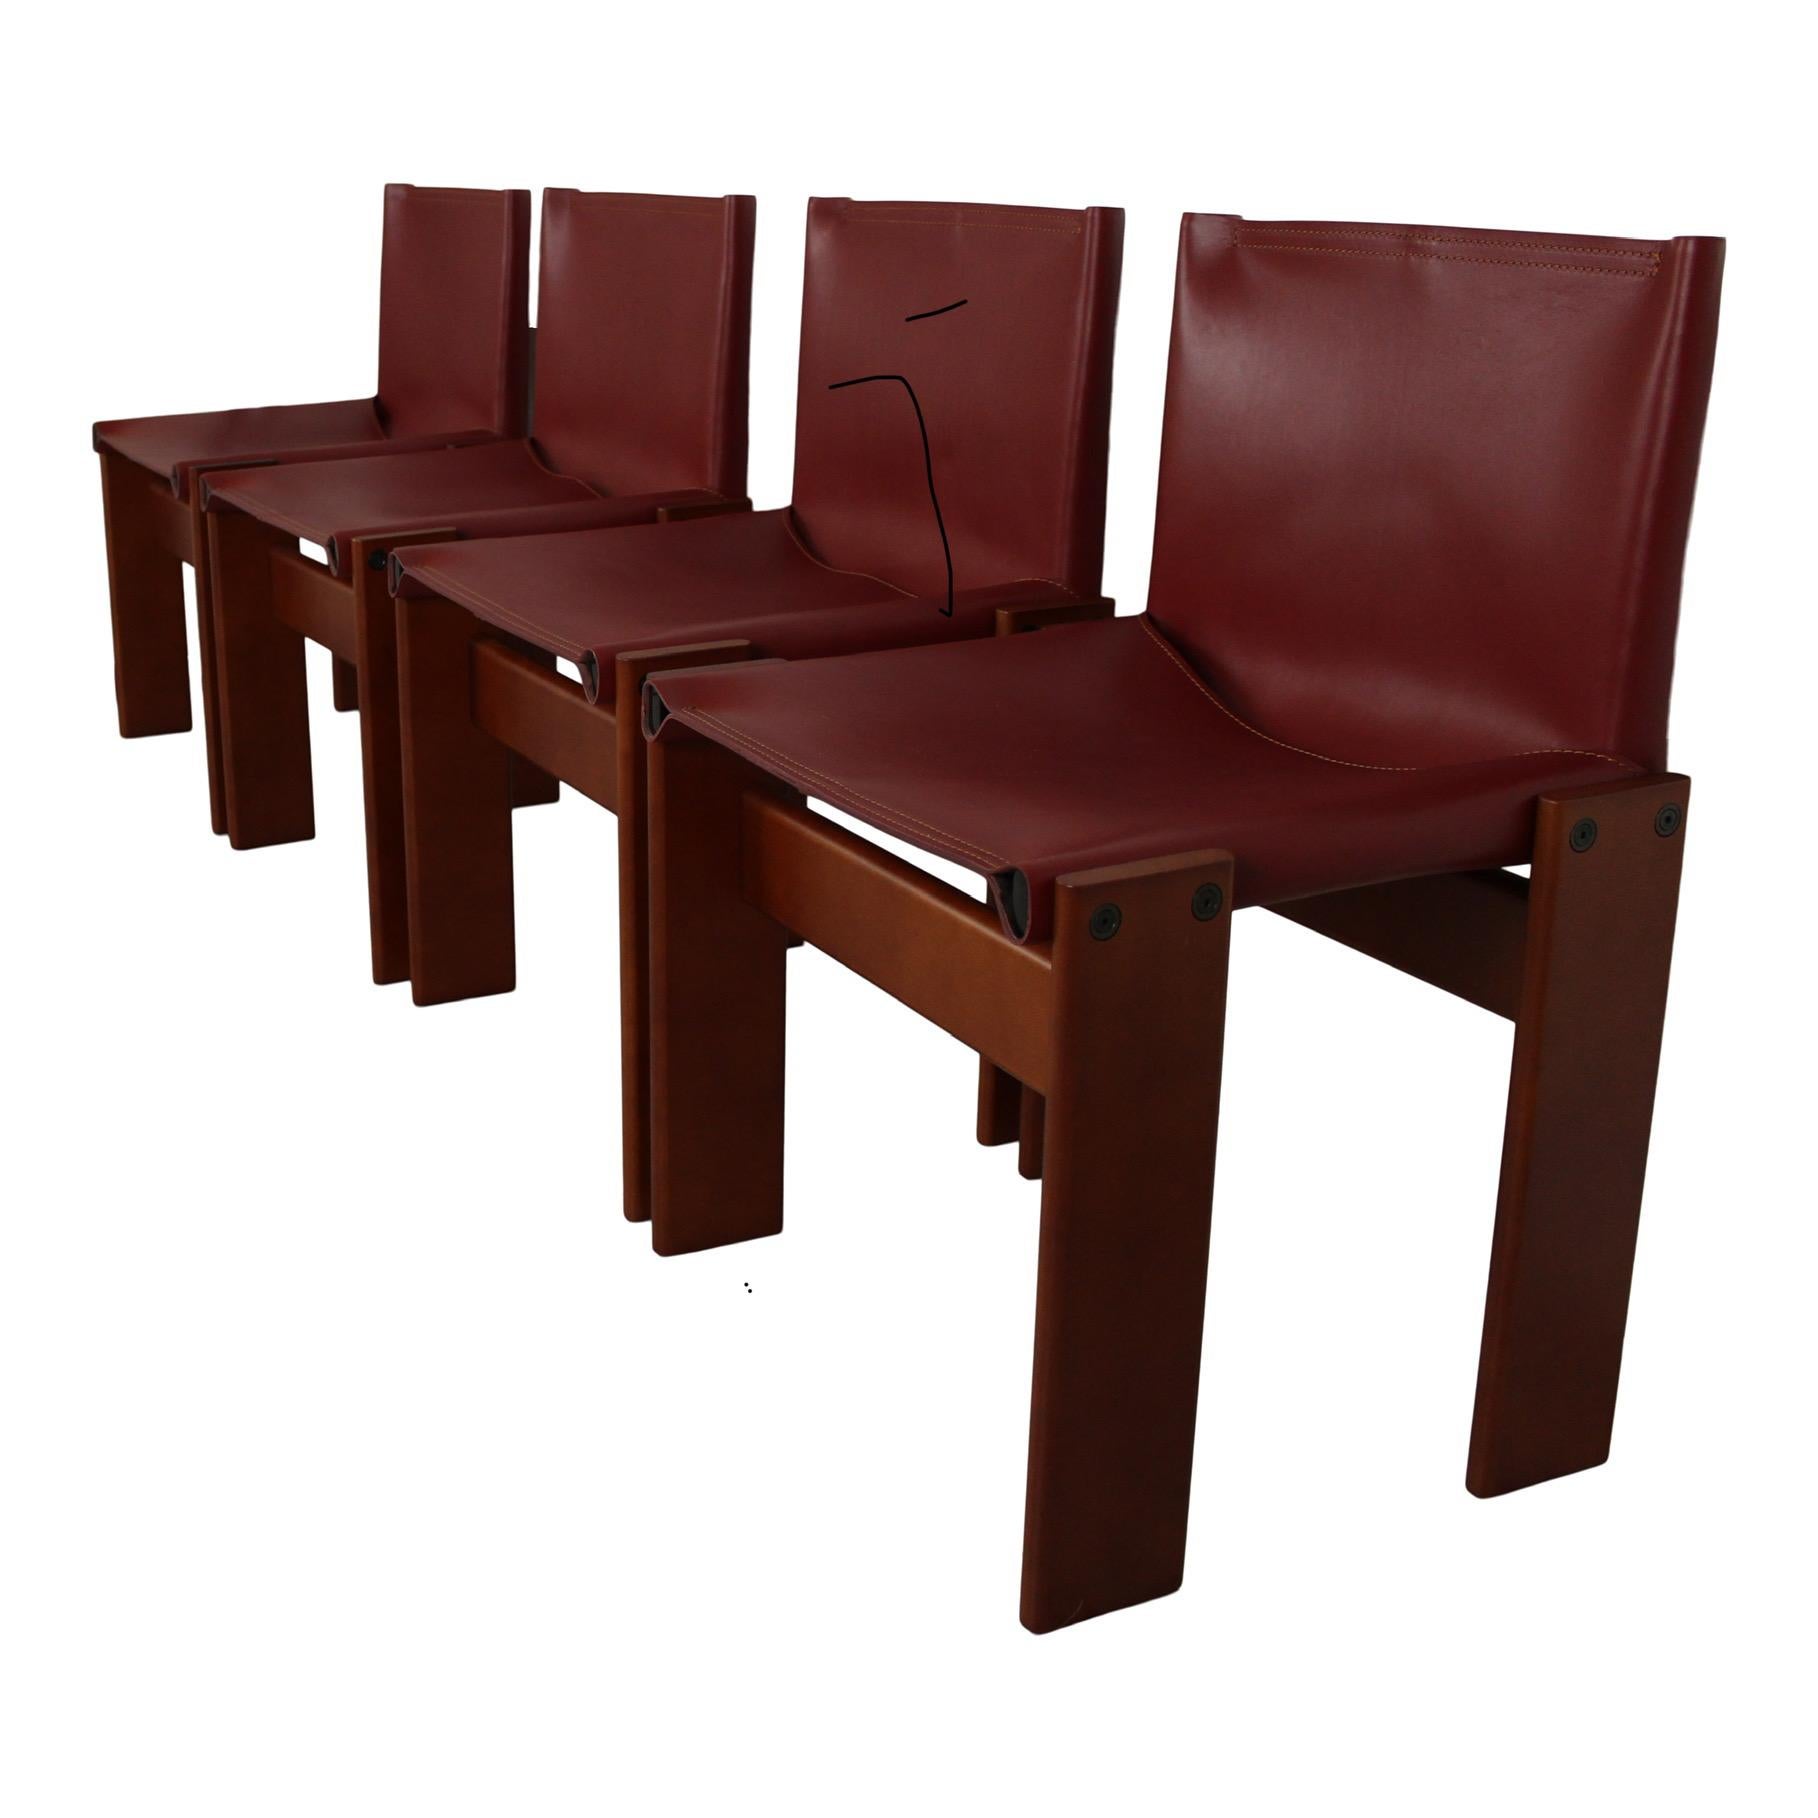 Set of six “Monk” dining chairs designed by Afra and Tobia Scarpa for Molteni in 1973.
Made of English red leather and walnut.
Fully restored in Italy.

Interesting is the ‘flat’ shape of this chair where the designer has chosen to place the legs